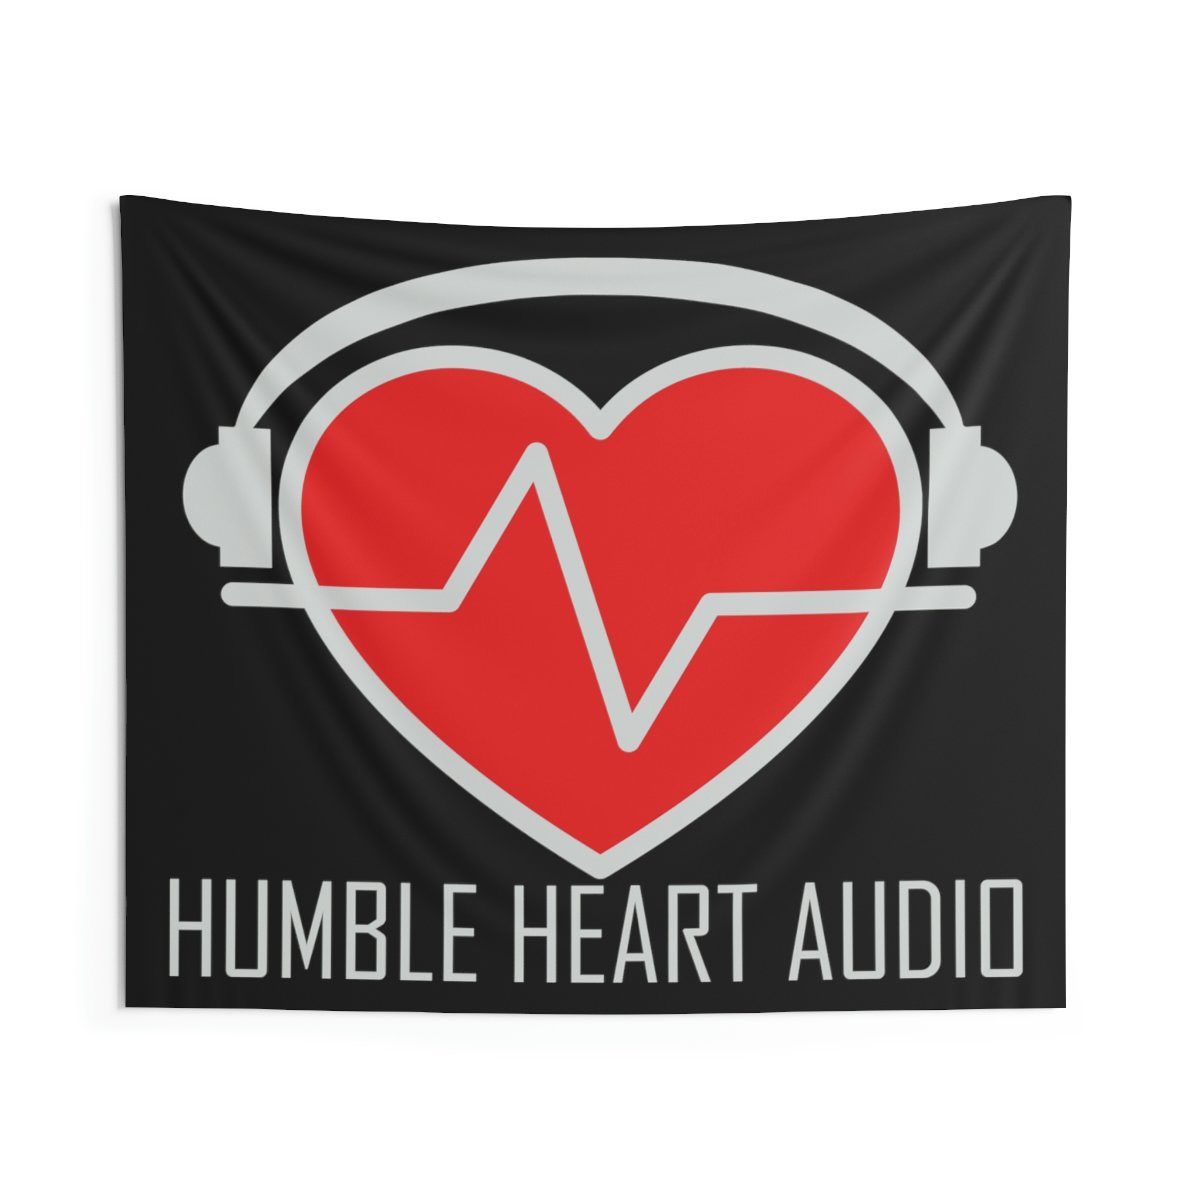 Humble Heart Audio Indoor Wall Tapestries